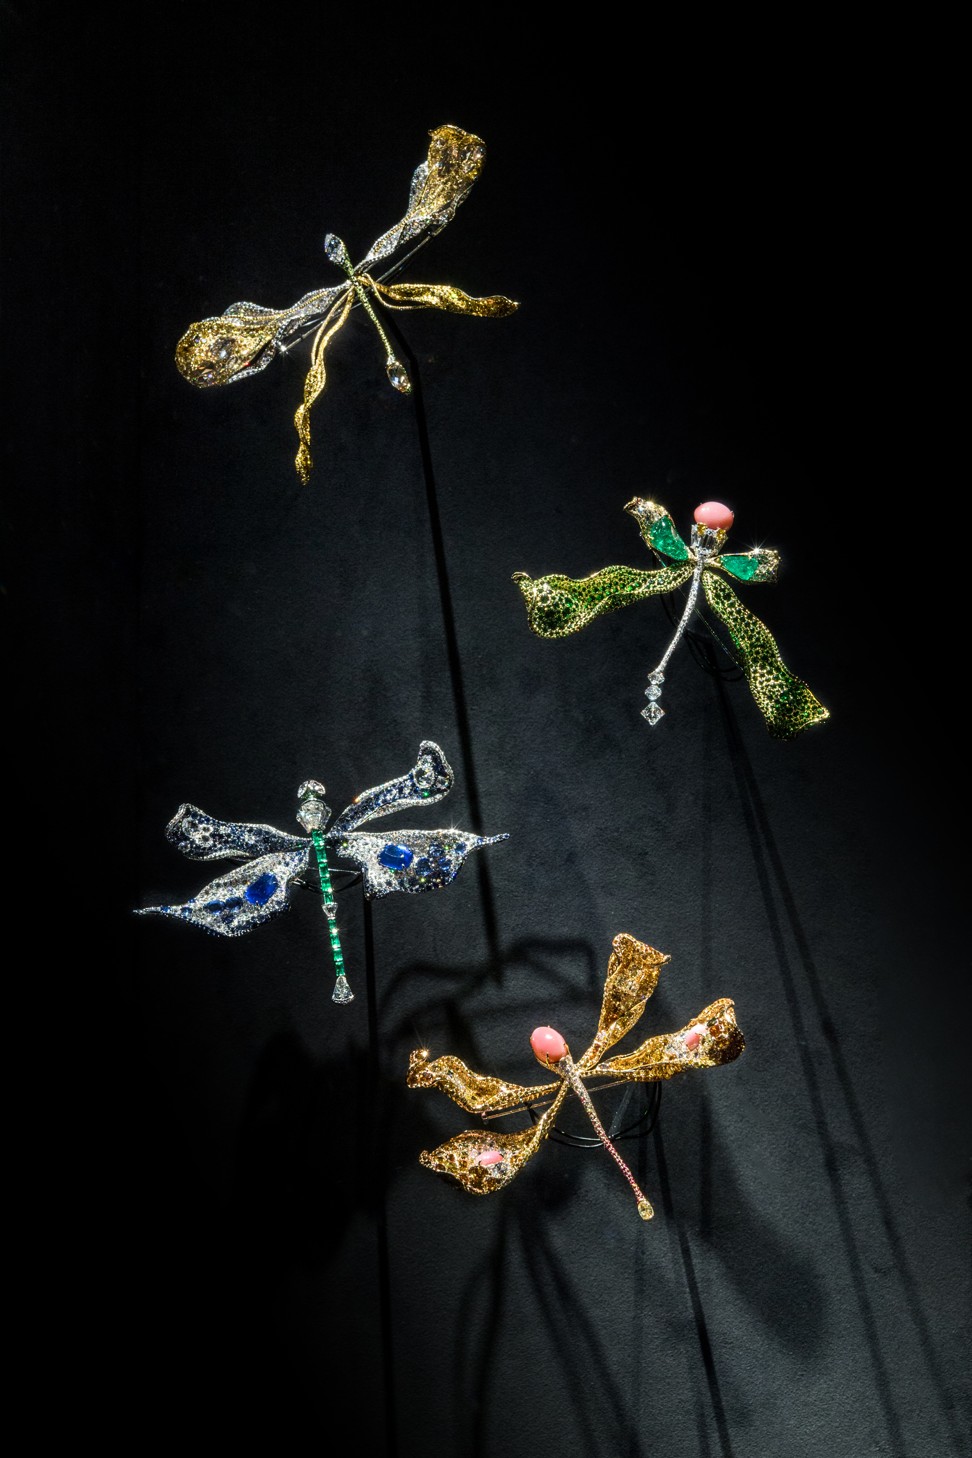 Assorted dragonfly brooches from Cindy Chao The Art Jewel’s Black Label Masterpiece collection.